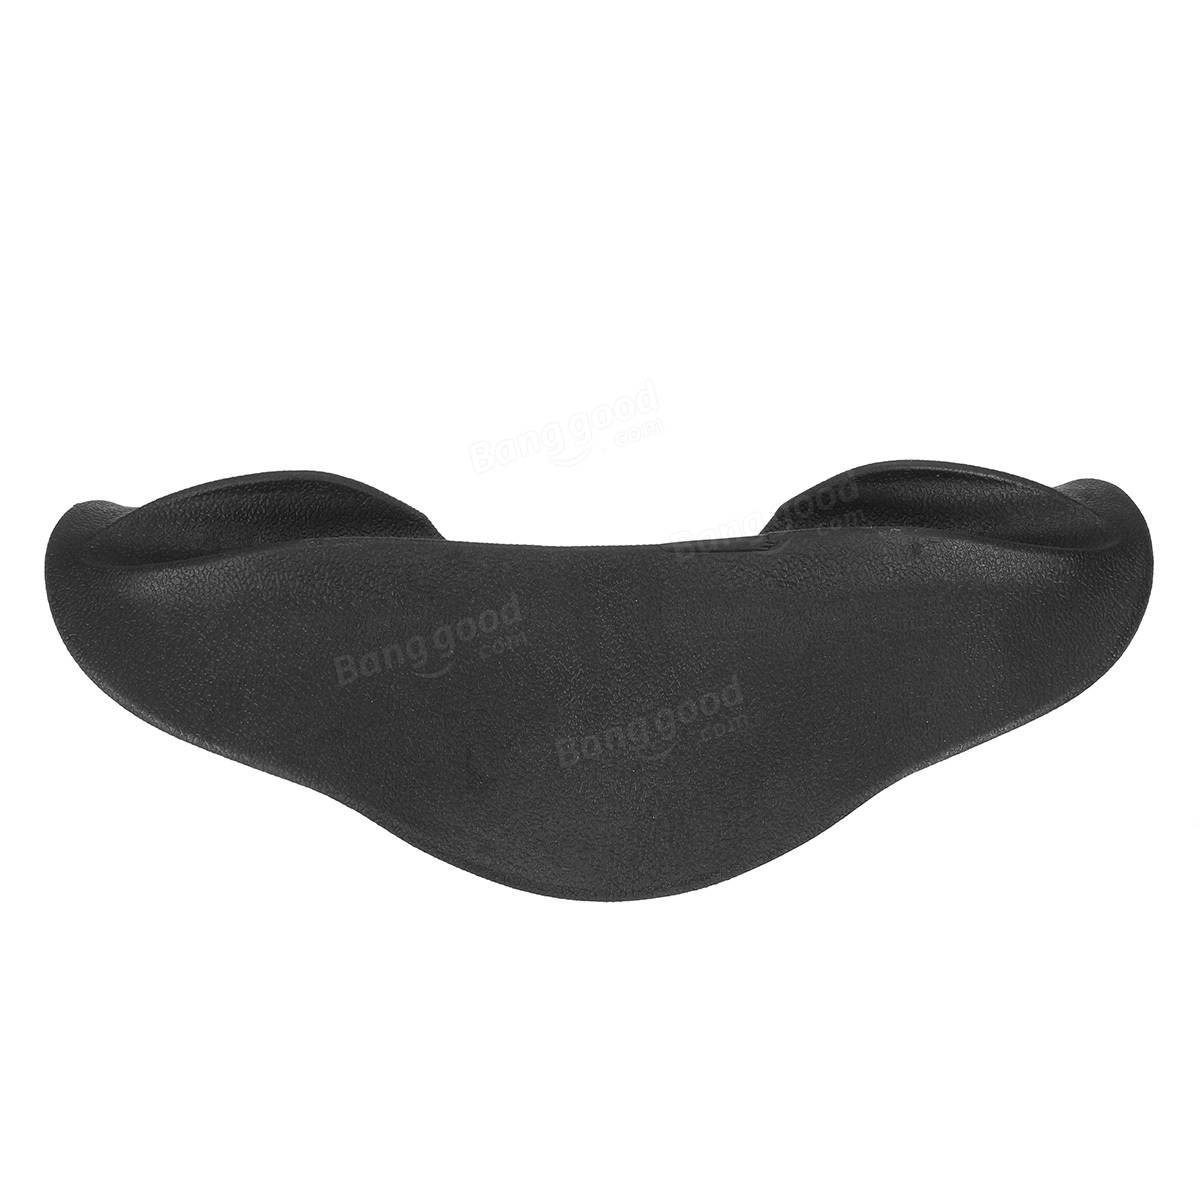 TPE Weightlifting Squat Pad Neck Shoulder Support Sports Barbell Gym Protector